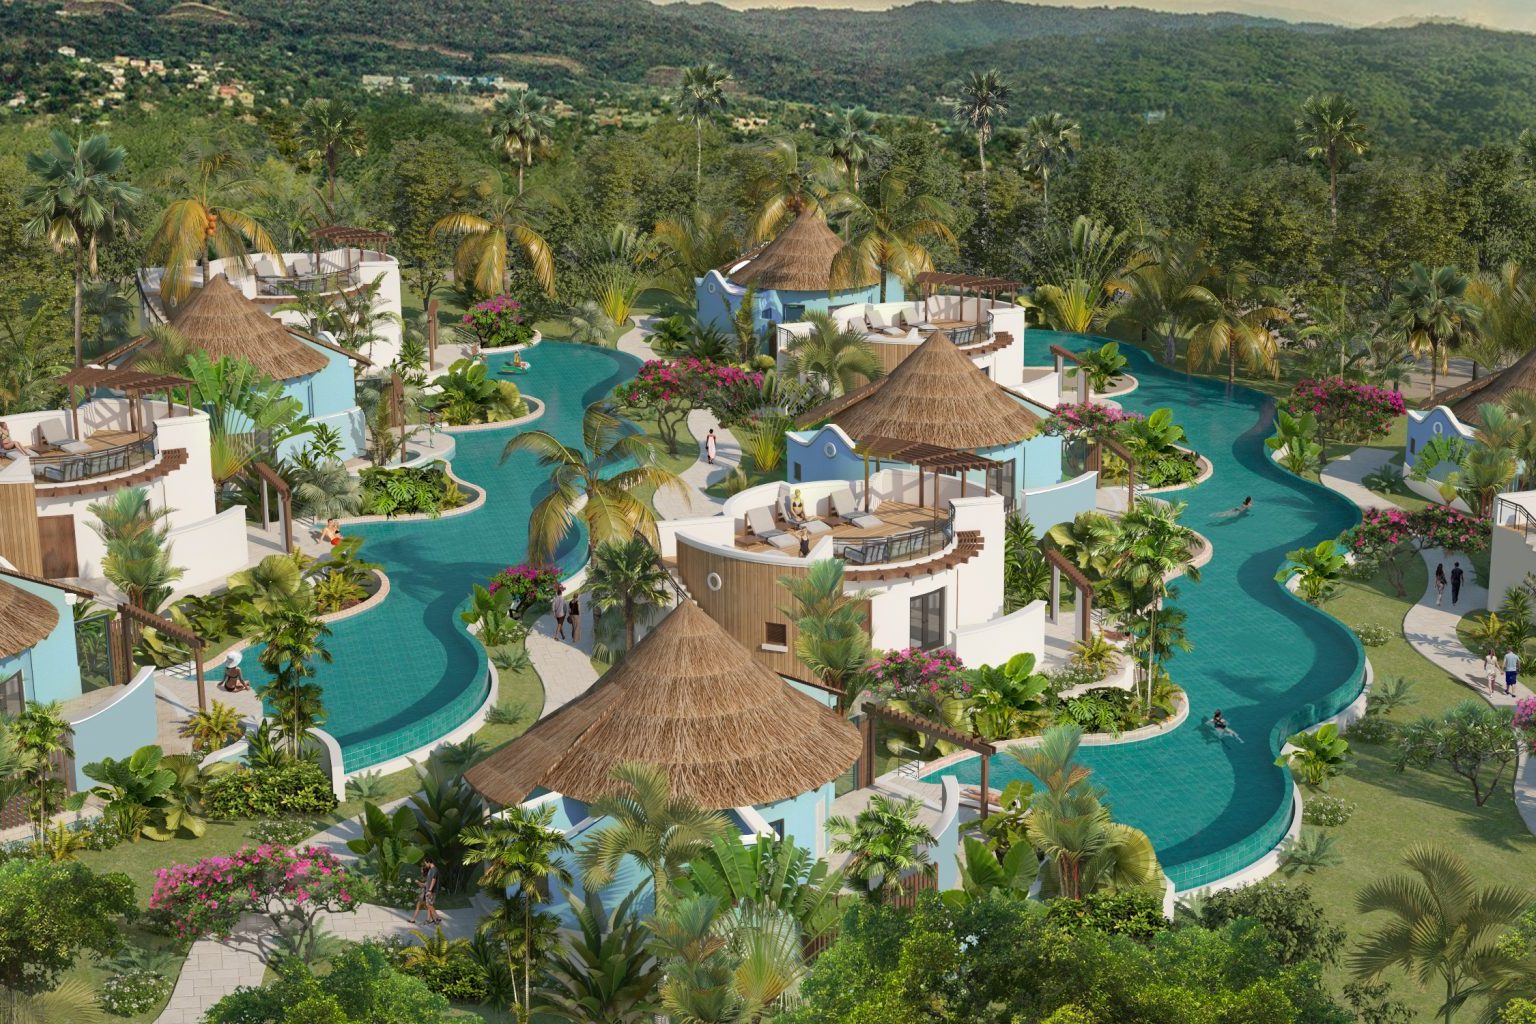 Sandals Resorts is on its own all-inclusive resort growth spurt, developing properties like Sandals Dunn’s River in Jamaica (rendering pictured).